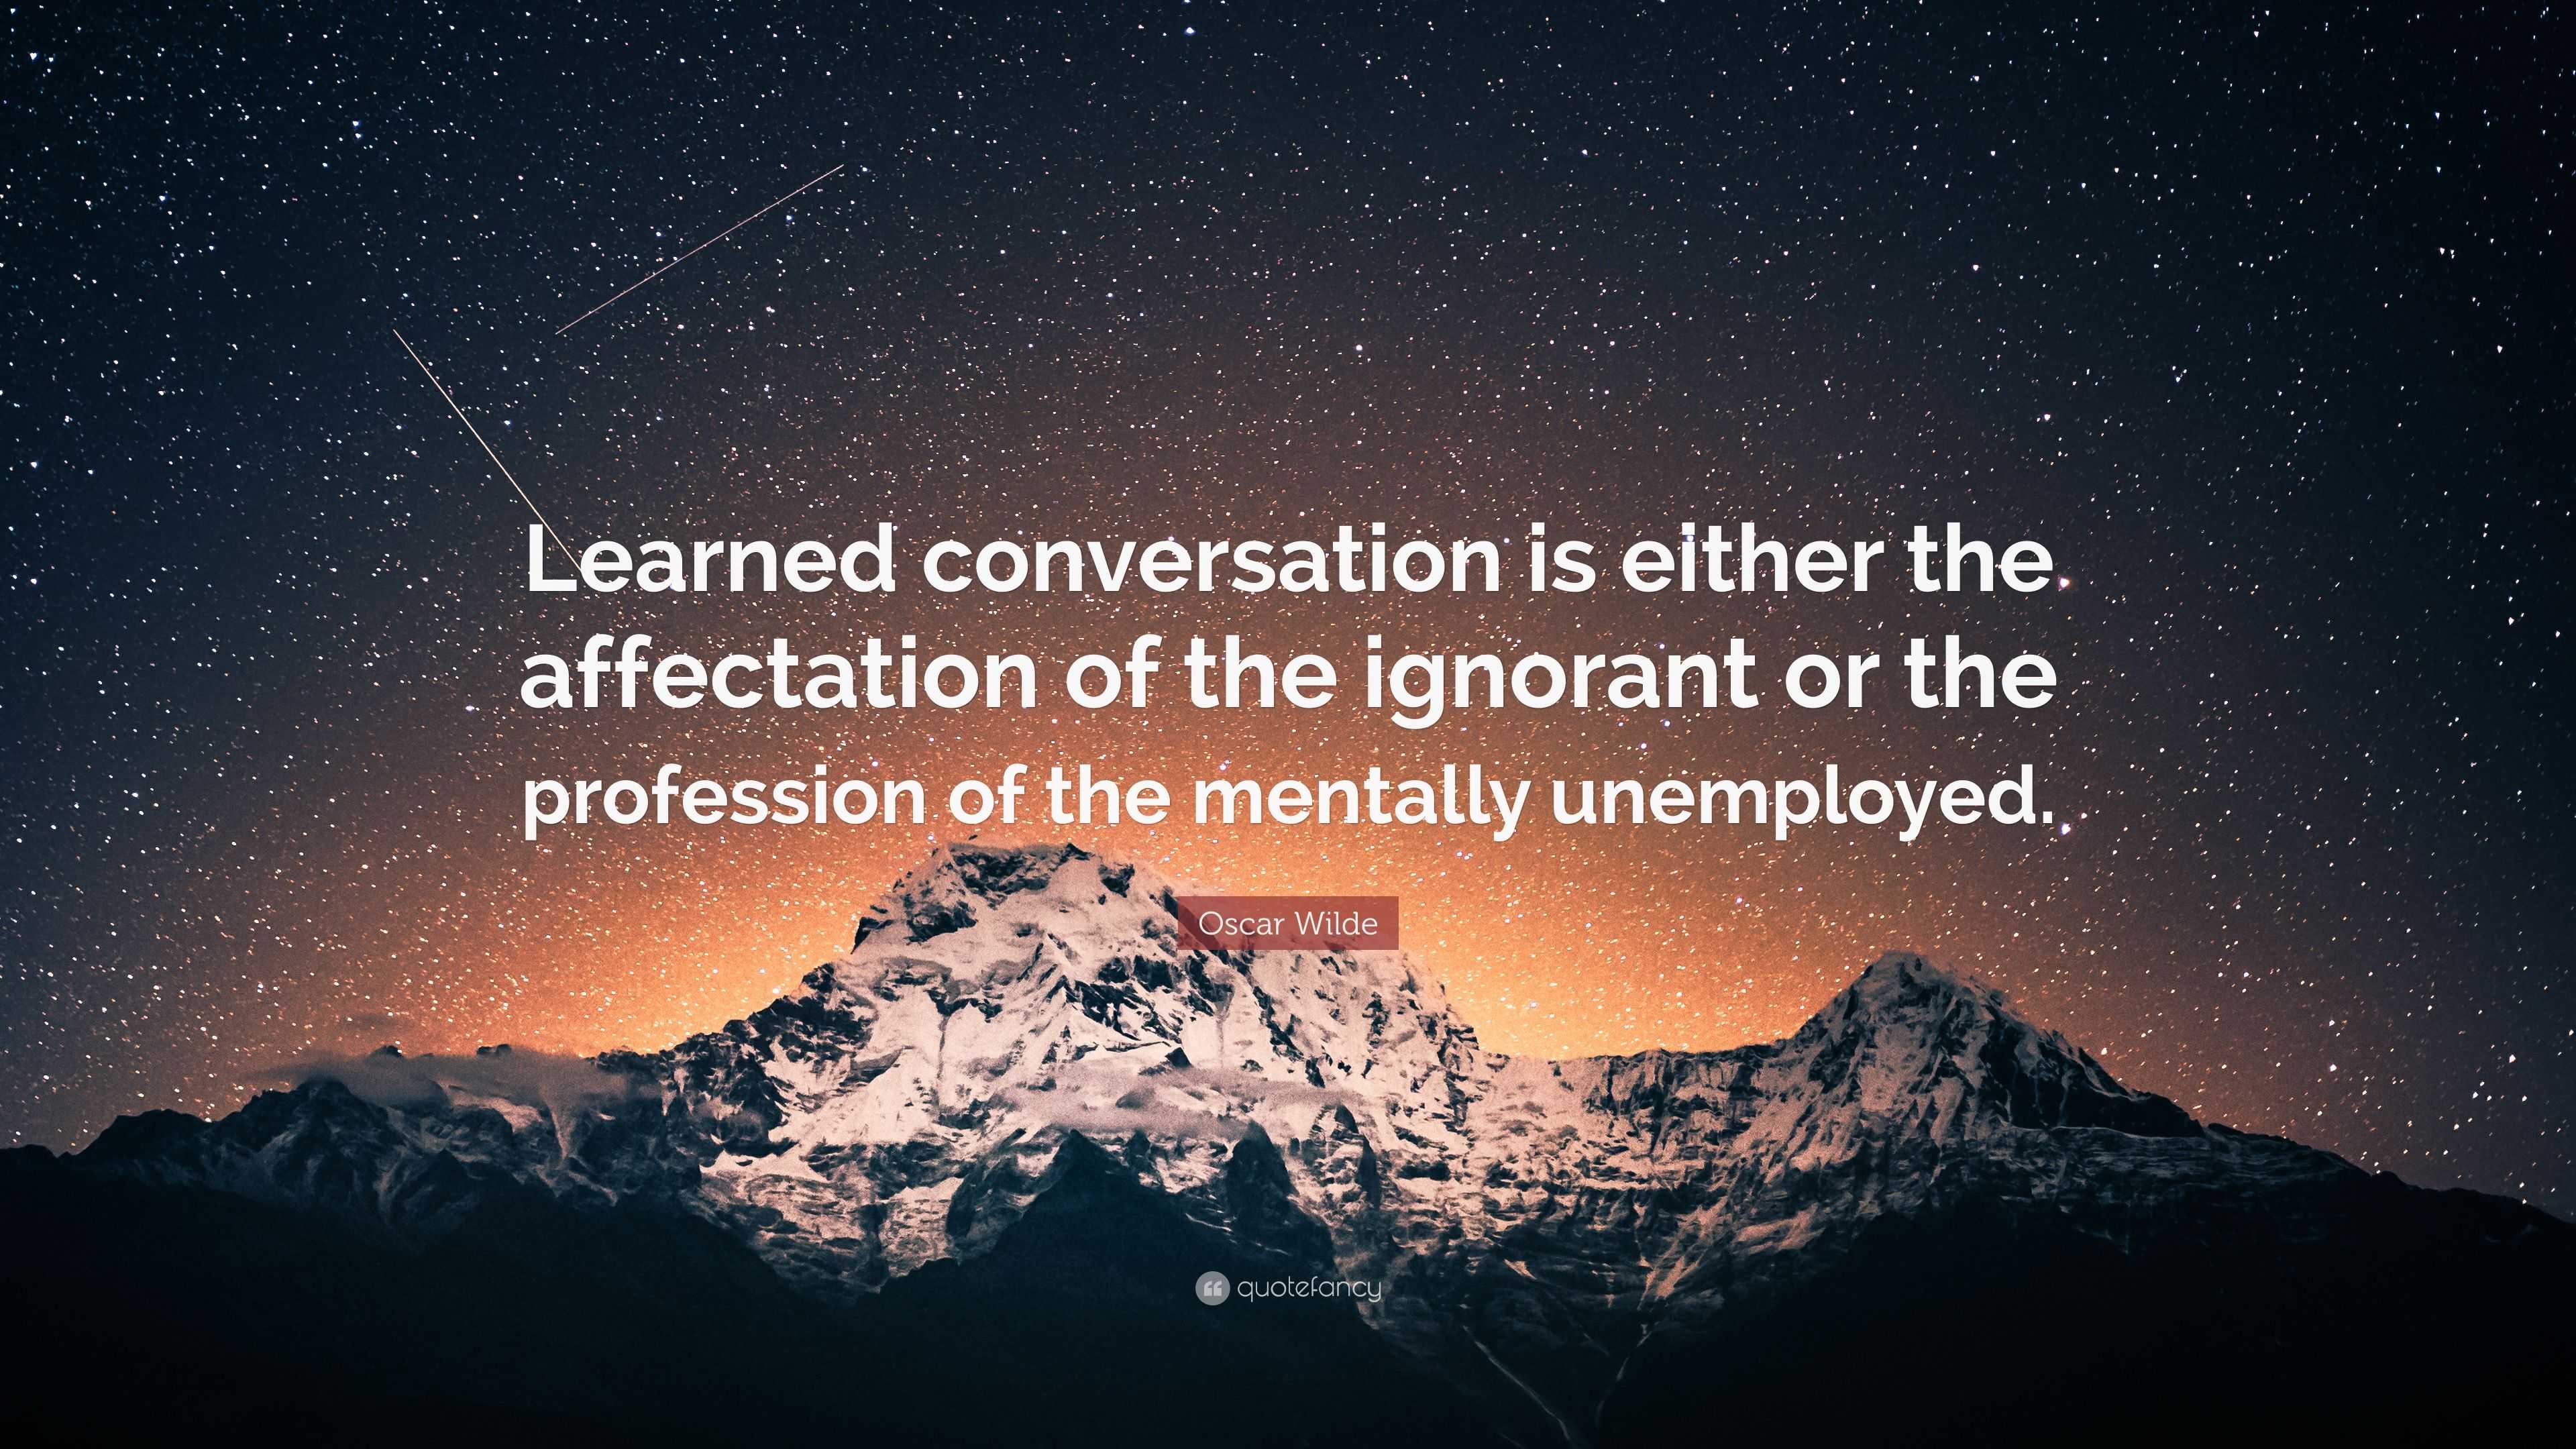 Oscar Wilde Quote: “Learned conversation is either the affectation of the  ignorant or the profession of